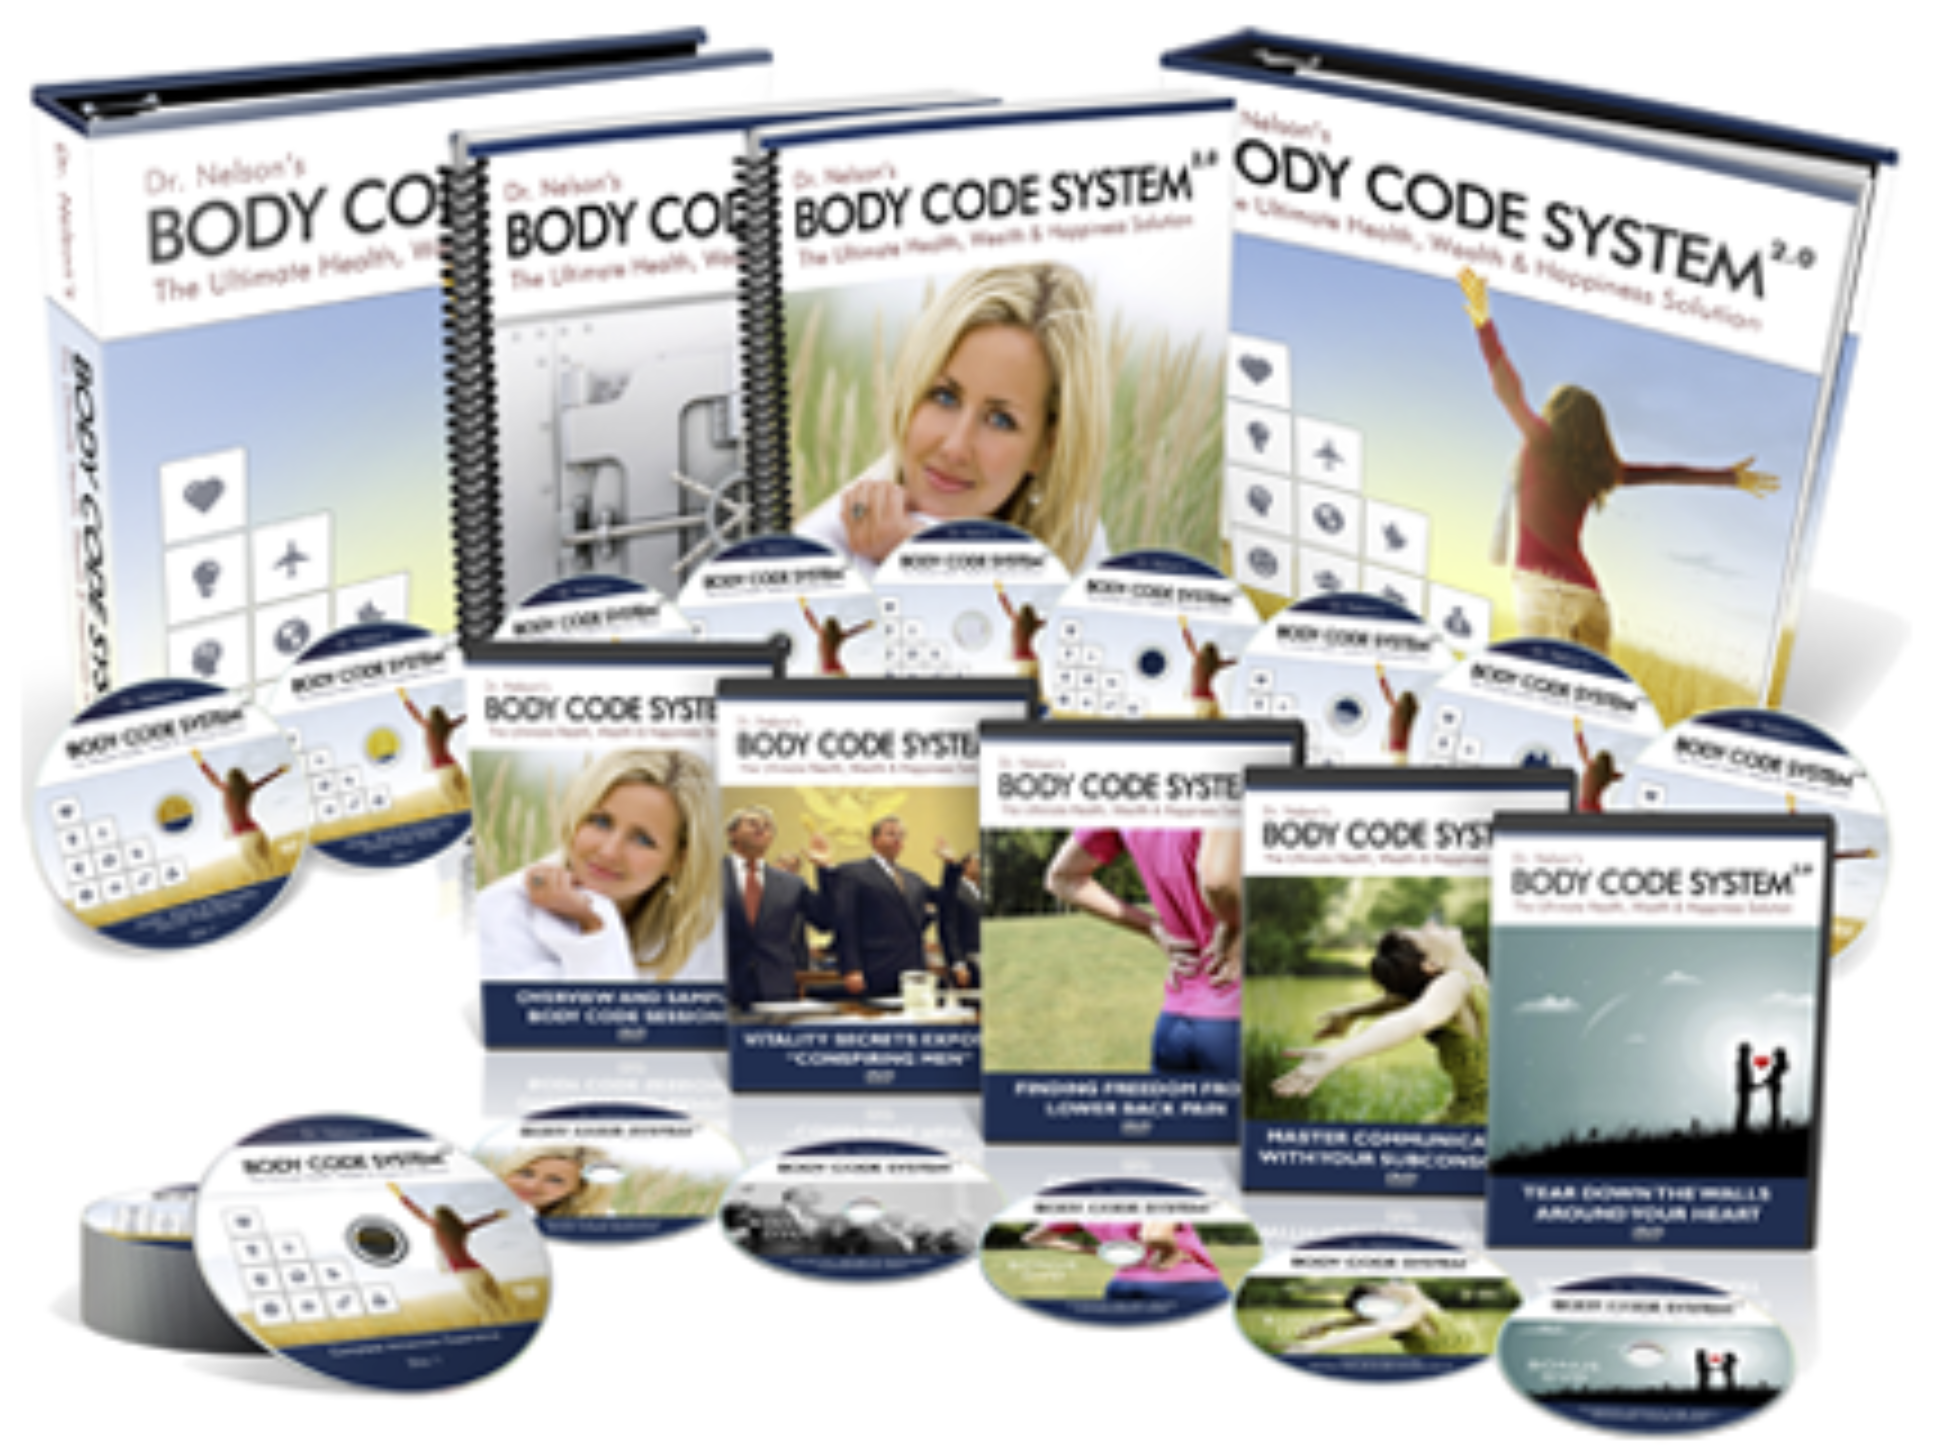 What is The Body Code System 2.0